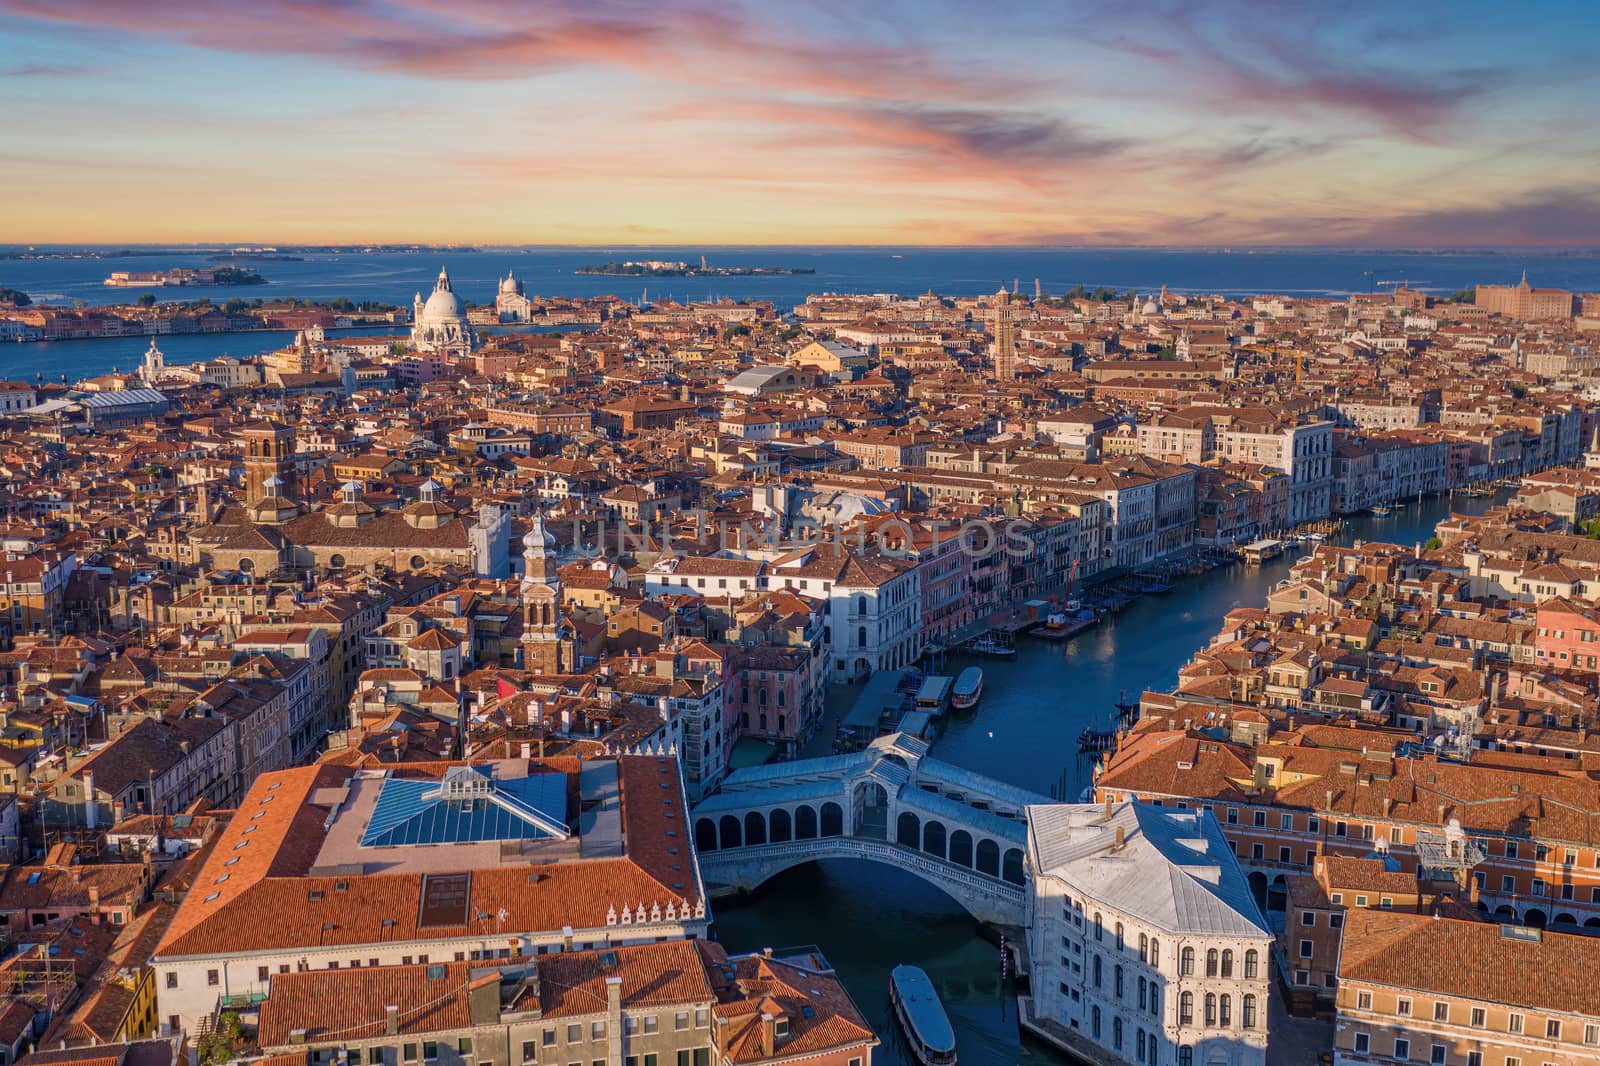 The last Venice aerial sunset picture you'll ever need by COffe